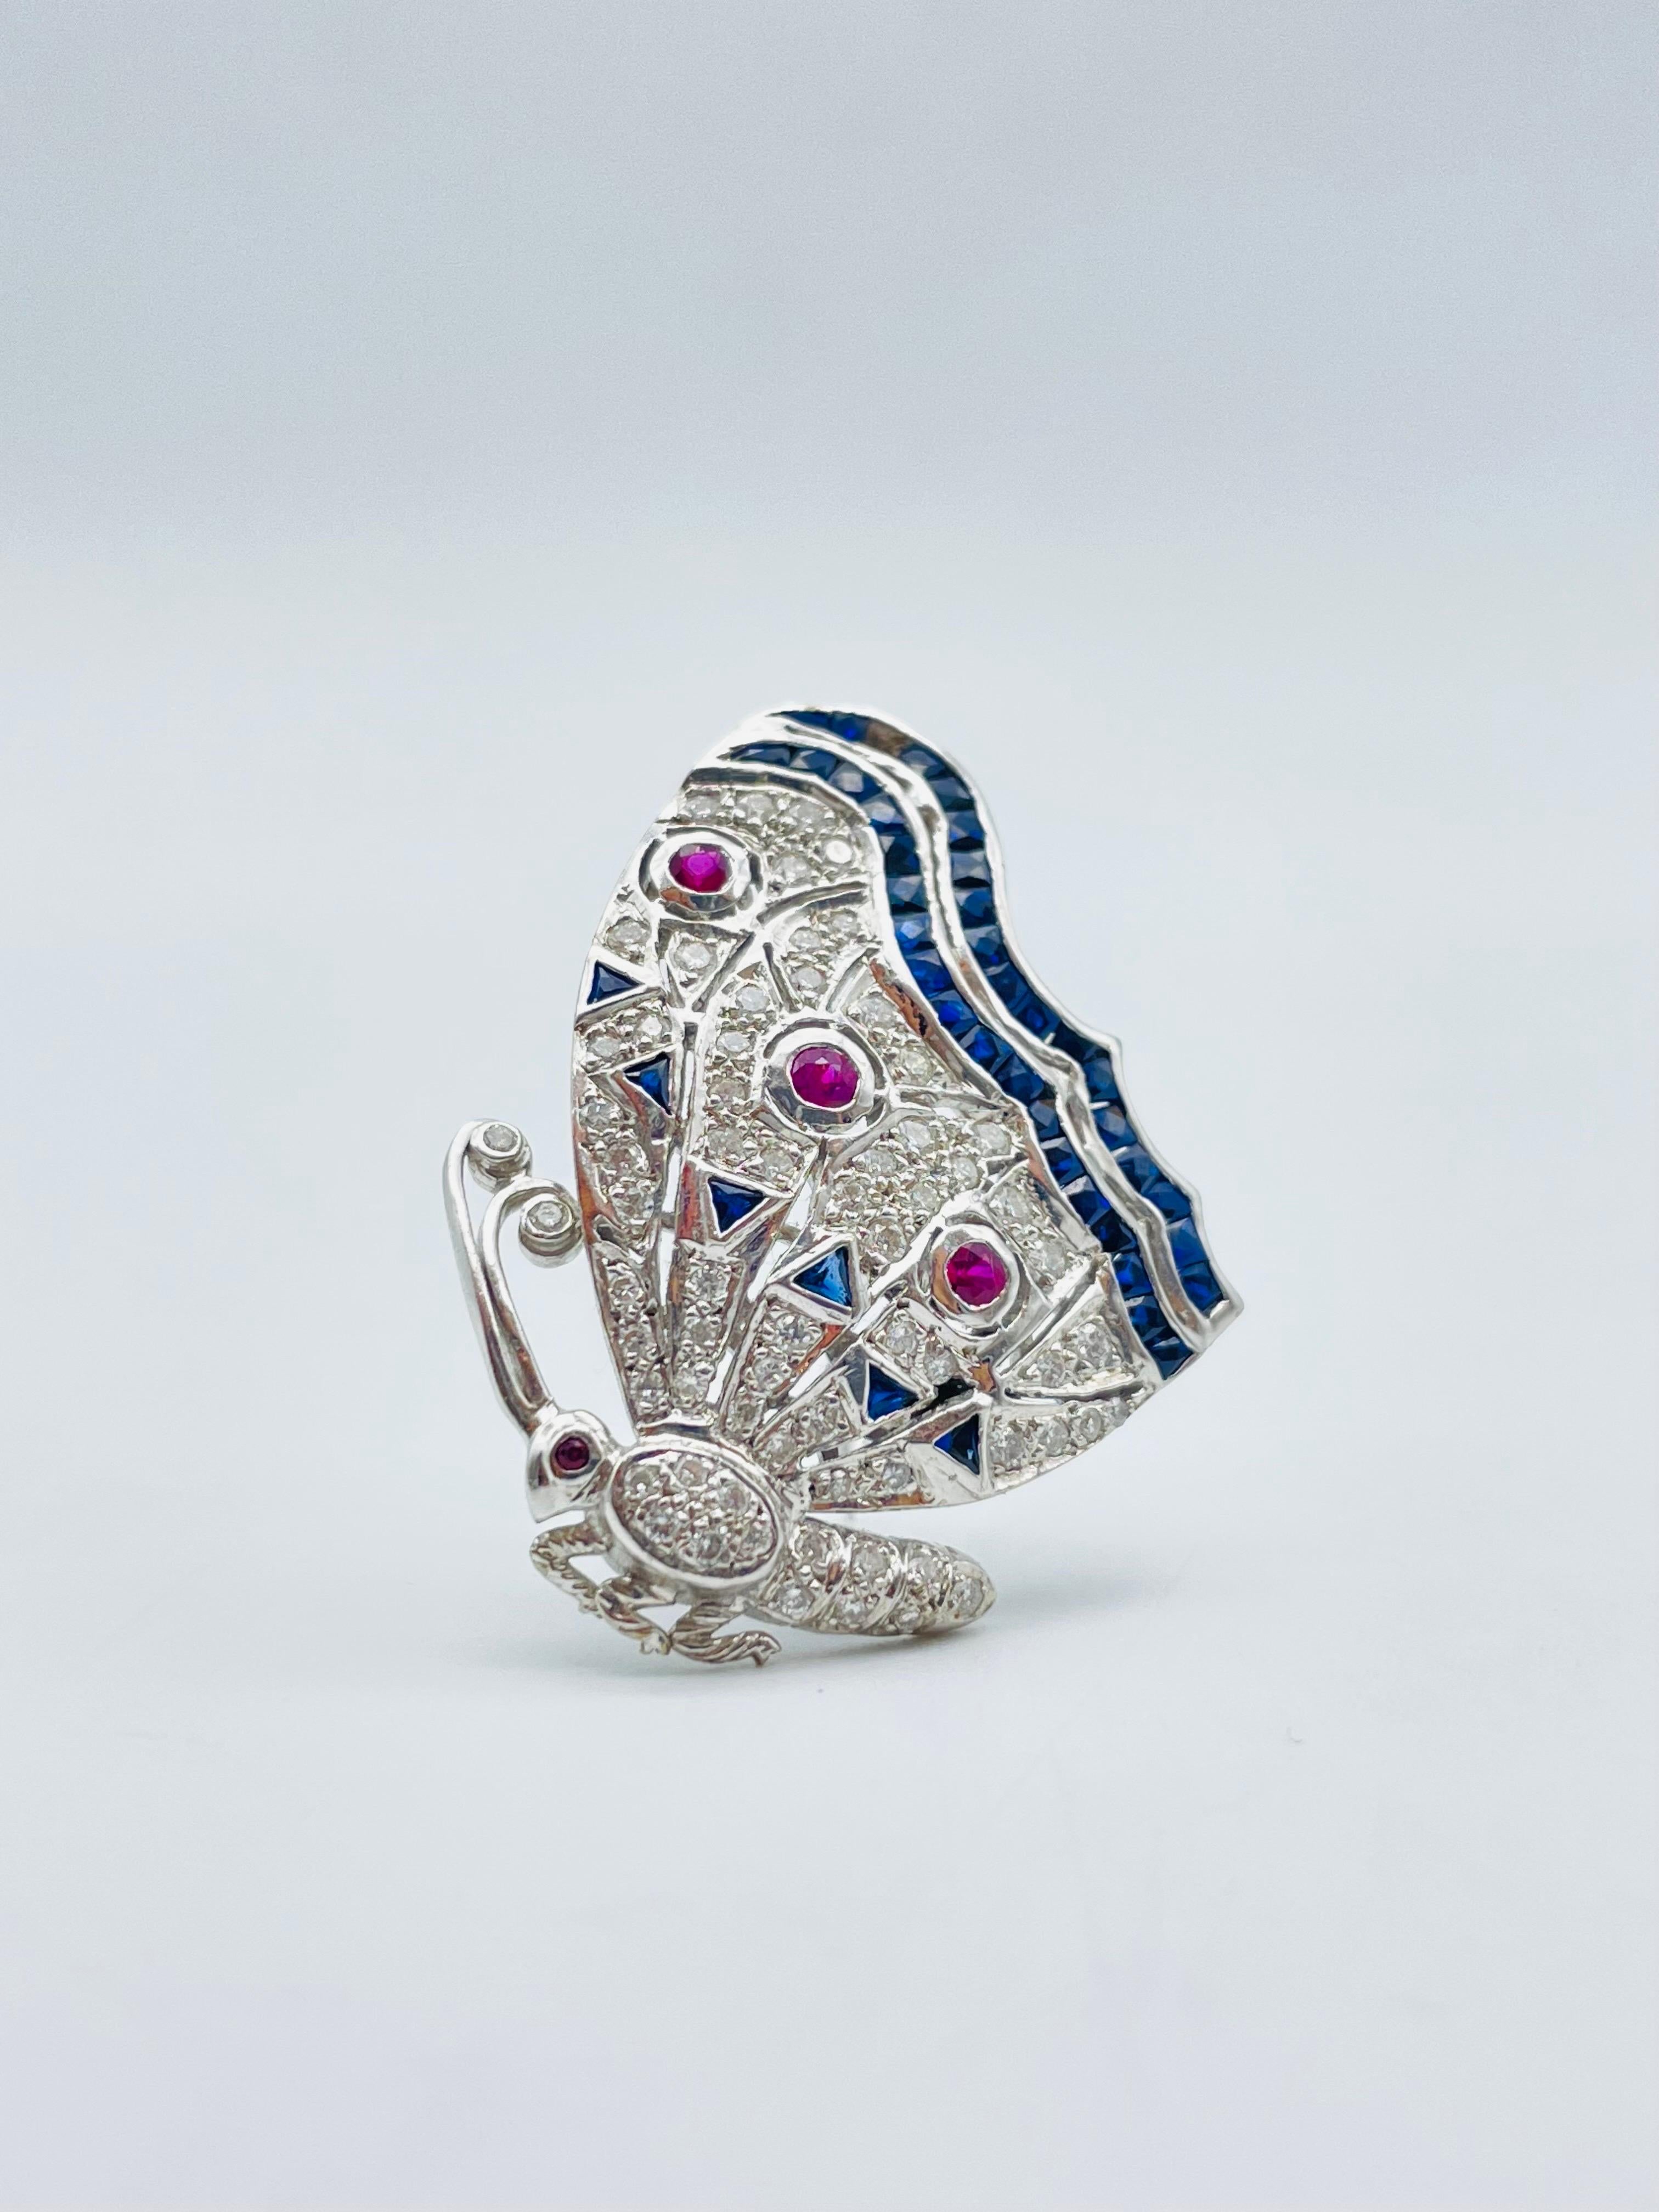 Luxury 18k white gold brooch with diamonds, sapphires and rubies iced out For Sale 9